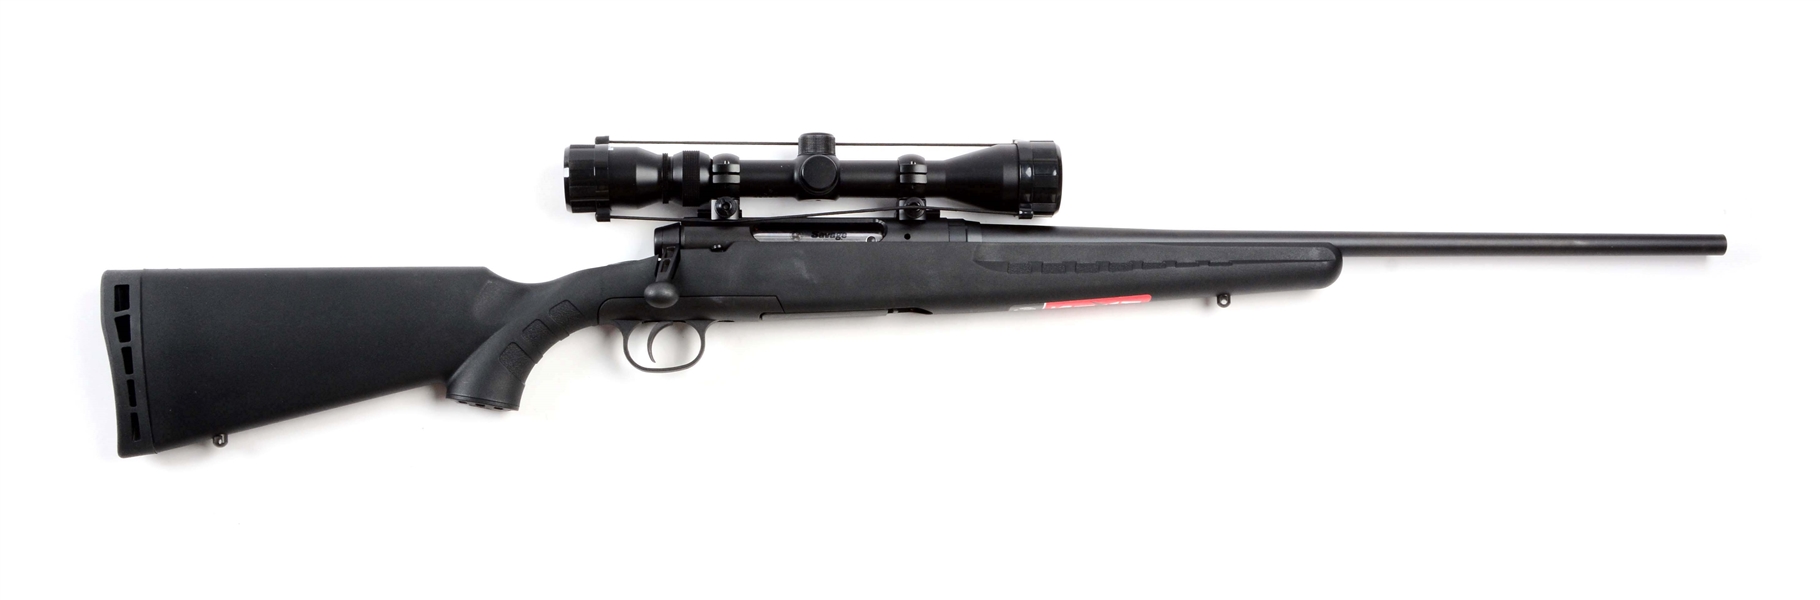 (M) SAVAGE AXIS MODEL BOLT ACTION RIFLE.